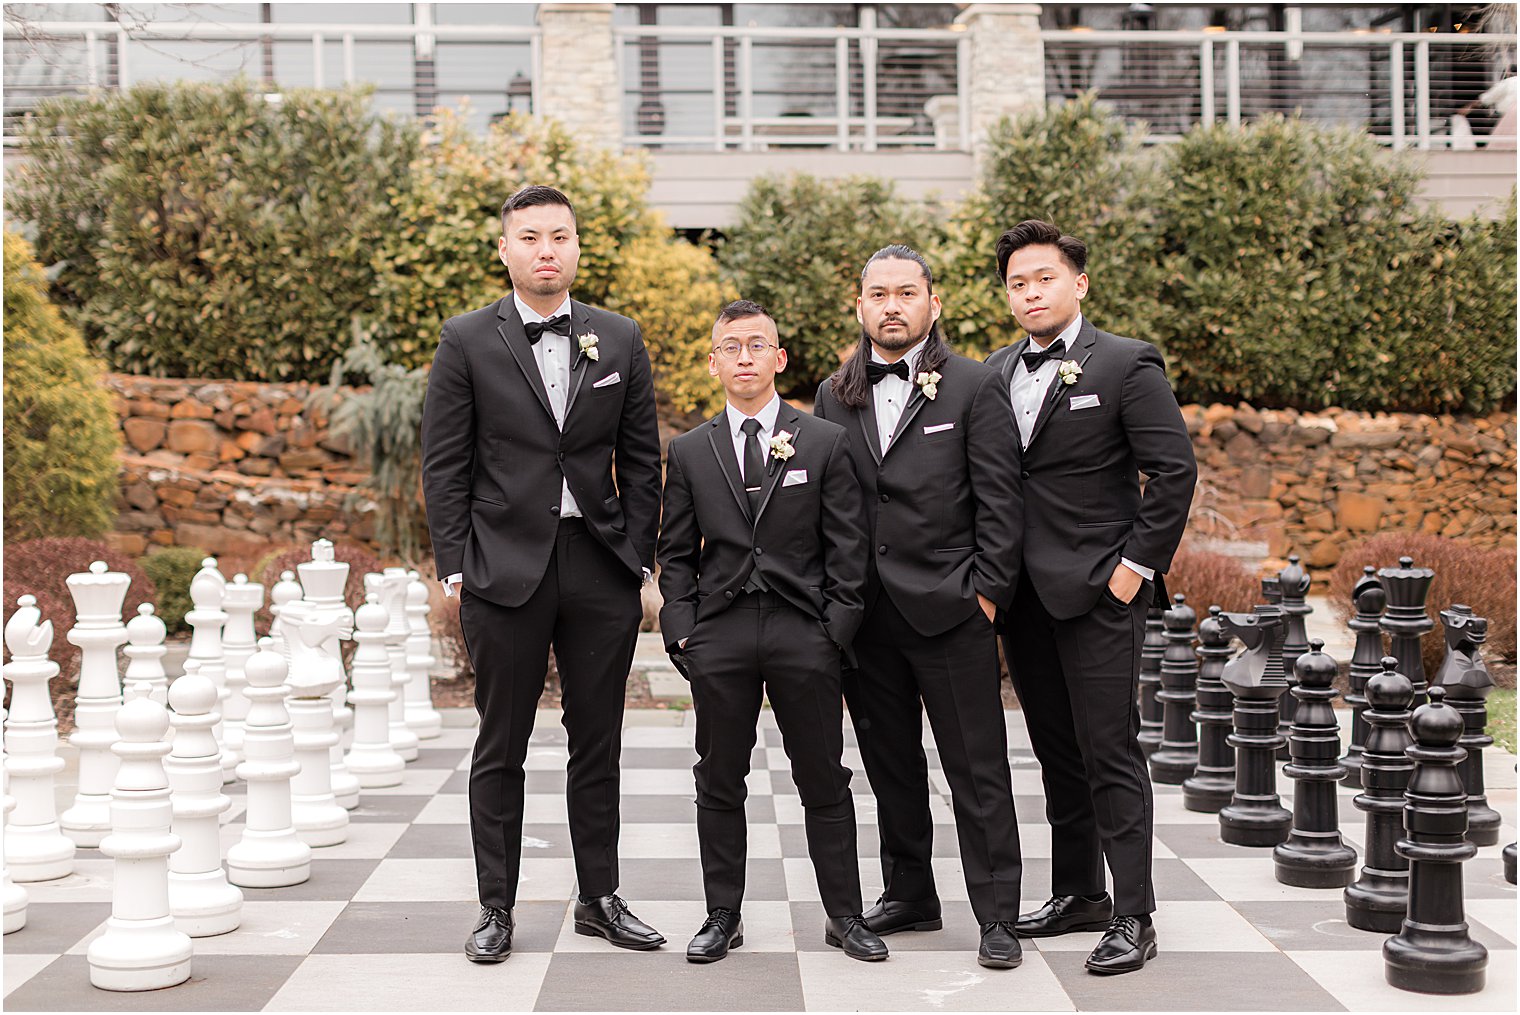 groom and groomsmen stand together on outdoor chess board